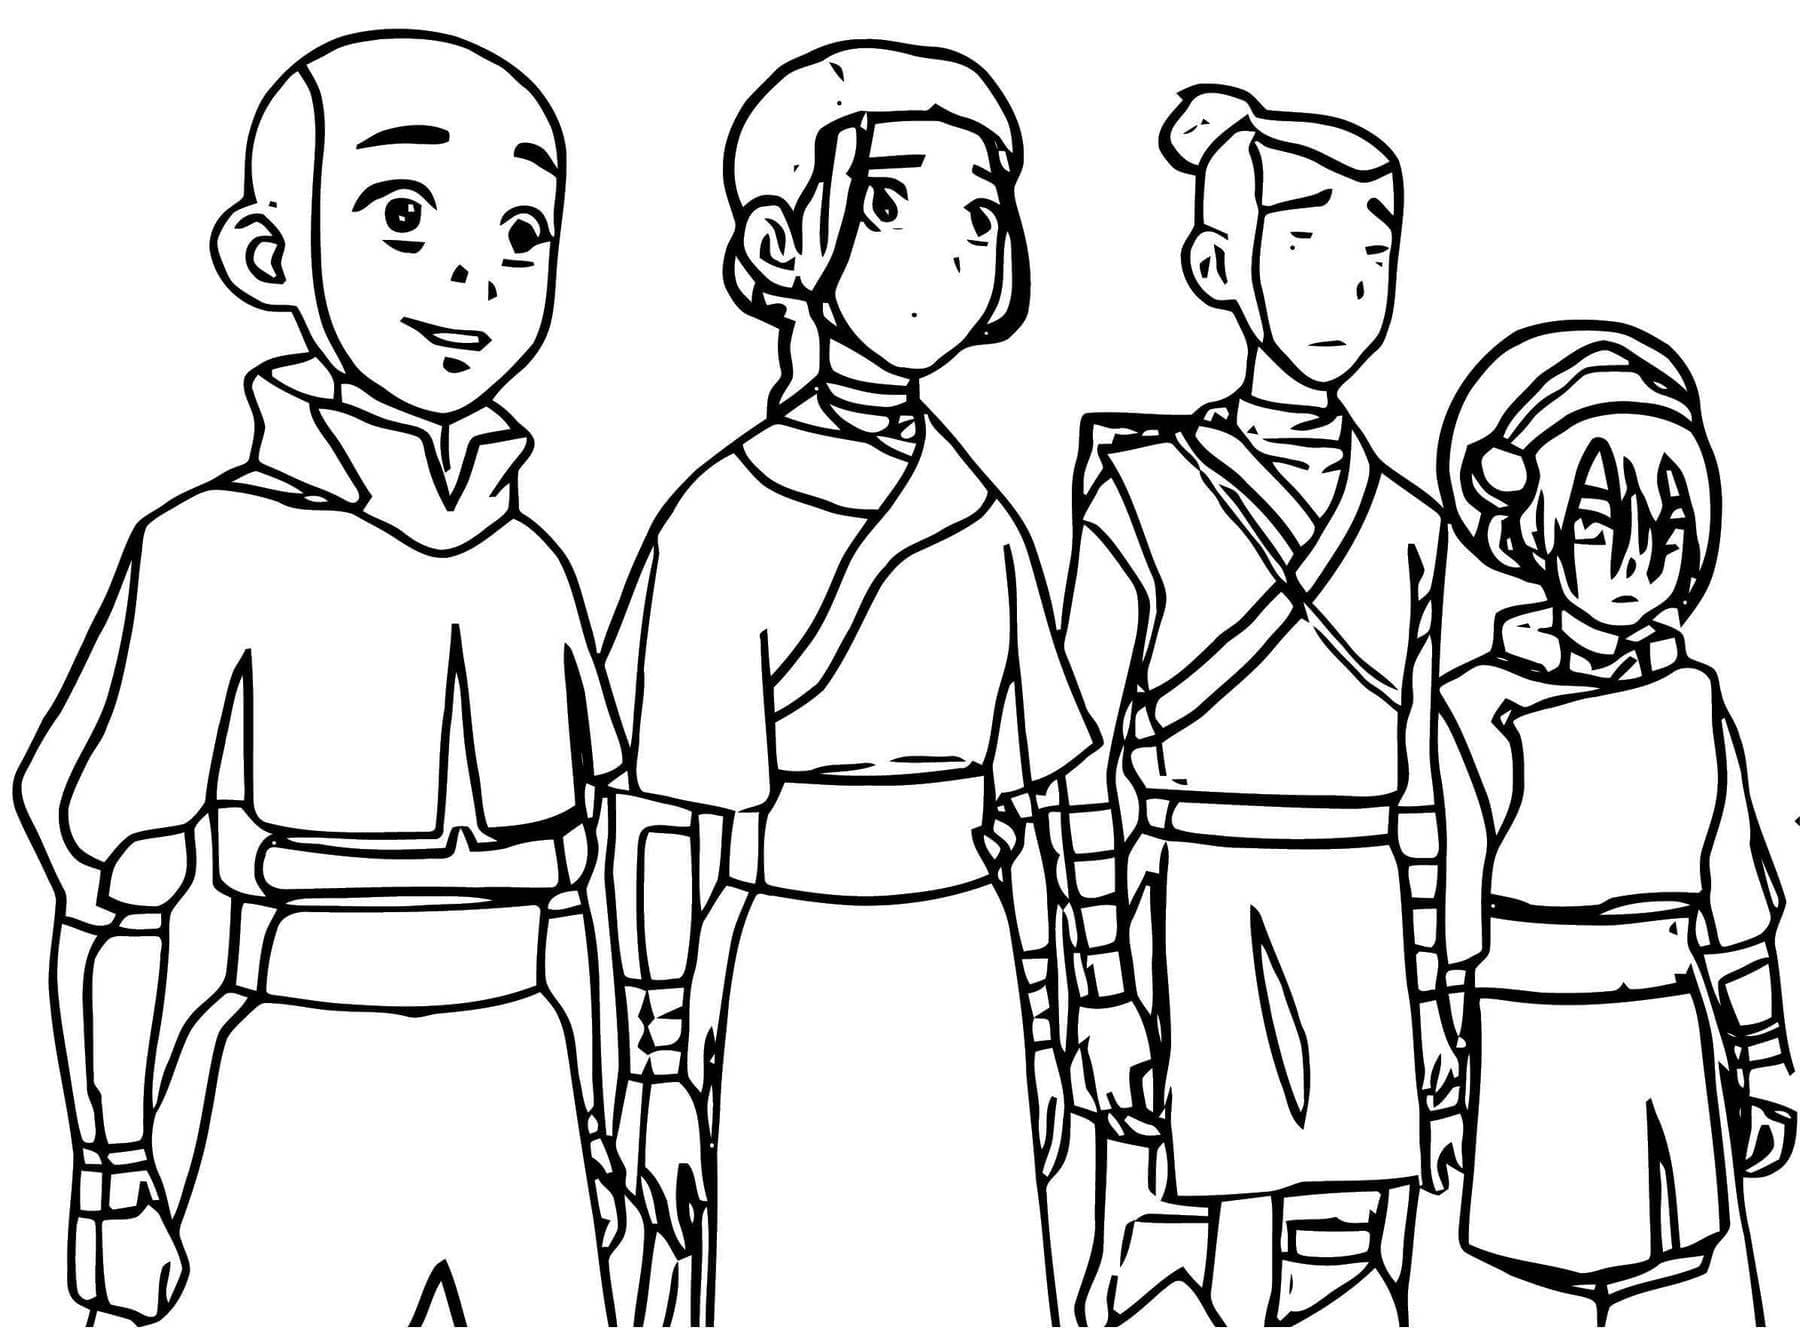 Aang et Ses Amis coloring page